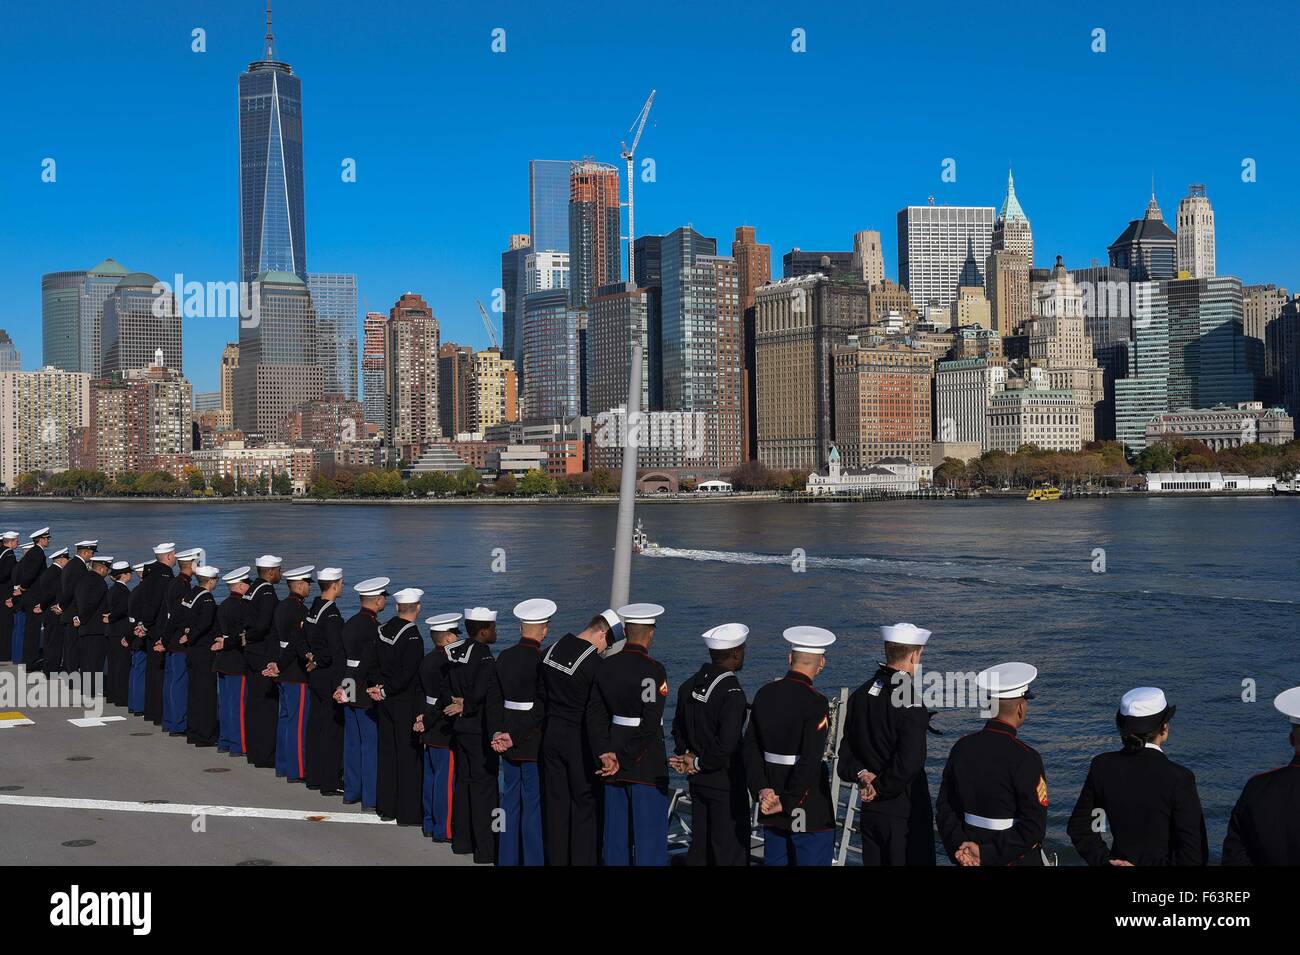 The U.S. Navy Sailors and Marines stand at parade rest while manning the rails aboard the San Antonio-class amphibious transport dock USS New York as it steams up the Hudson River past the skyline of Manhattan during Veterans Week November 8, 2015 in New York City, NY. Stock Photo